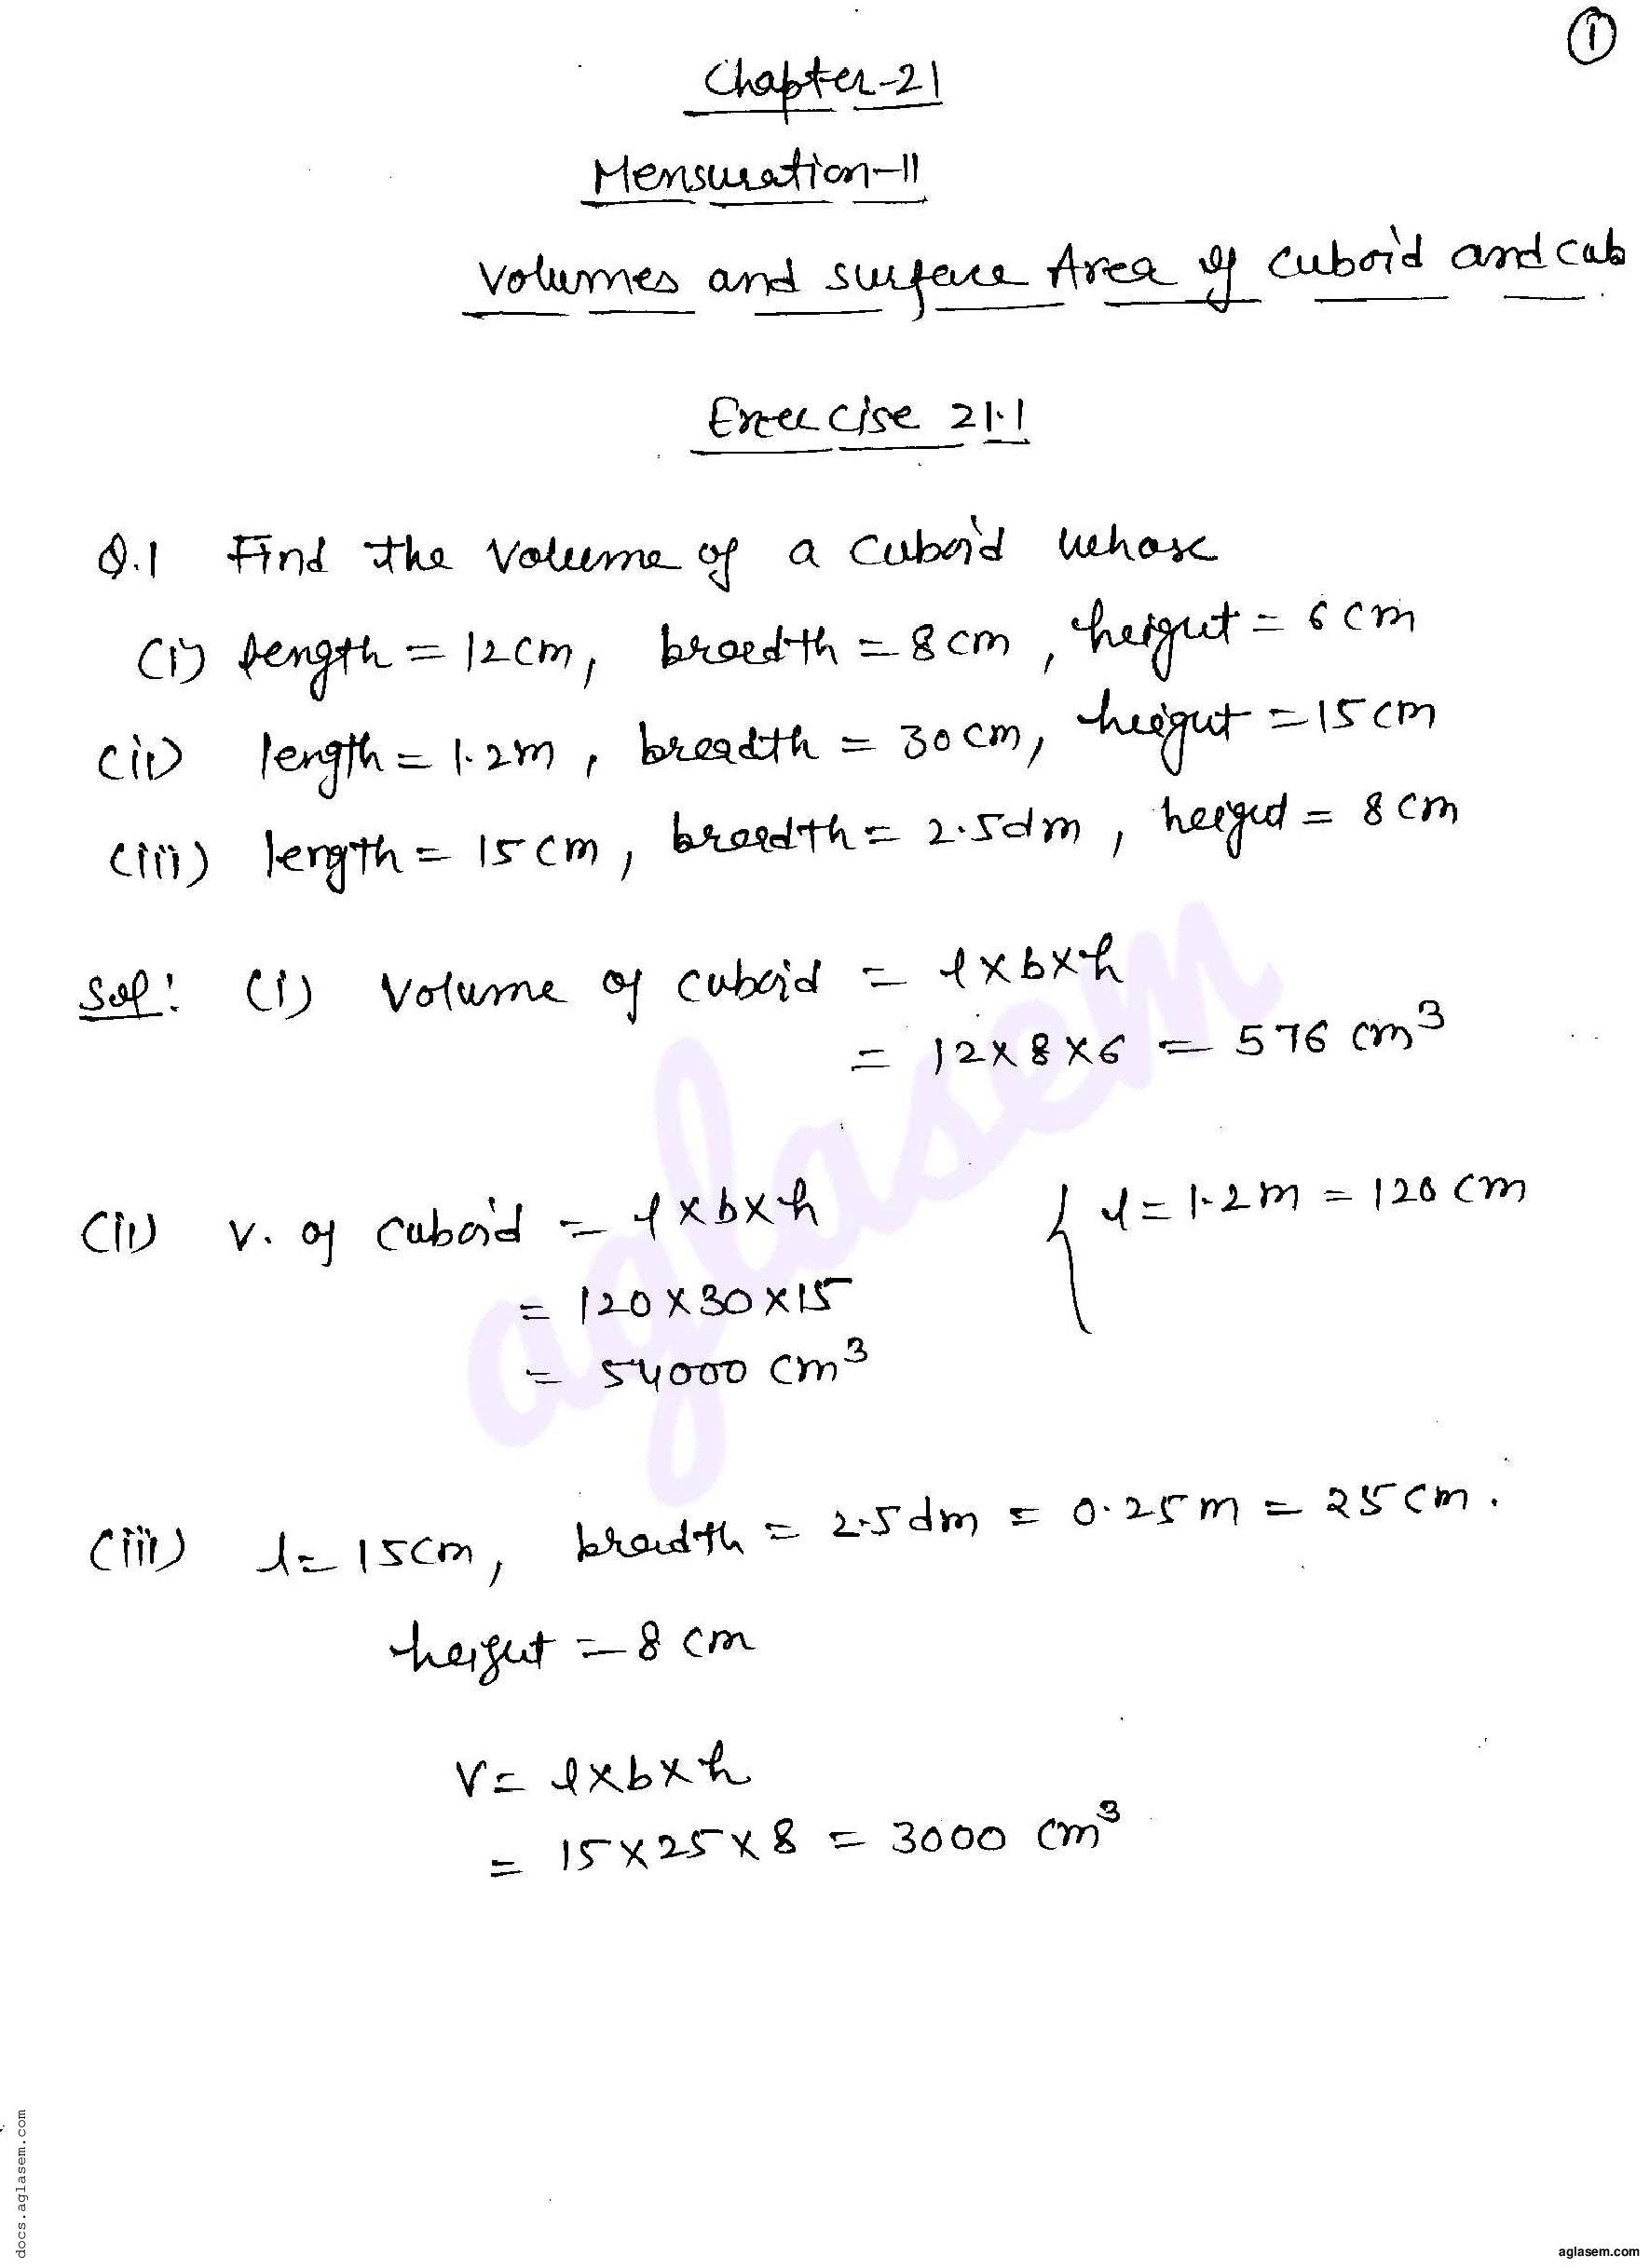 RD Sharma Solutions Class 8 Chapter 21 Mensuration II Volumes and Surface Areas of a Cuboid and a Cube Exercise 21.1 - Page 1